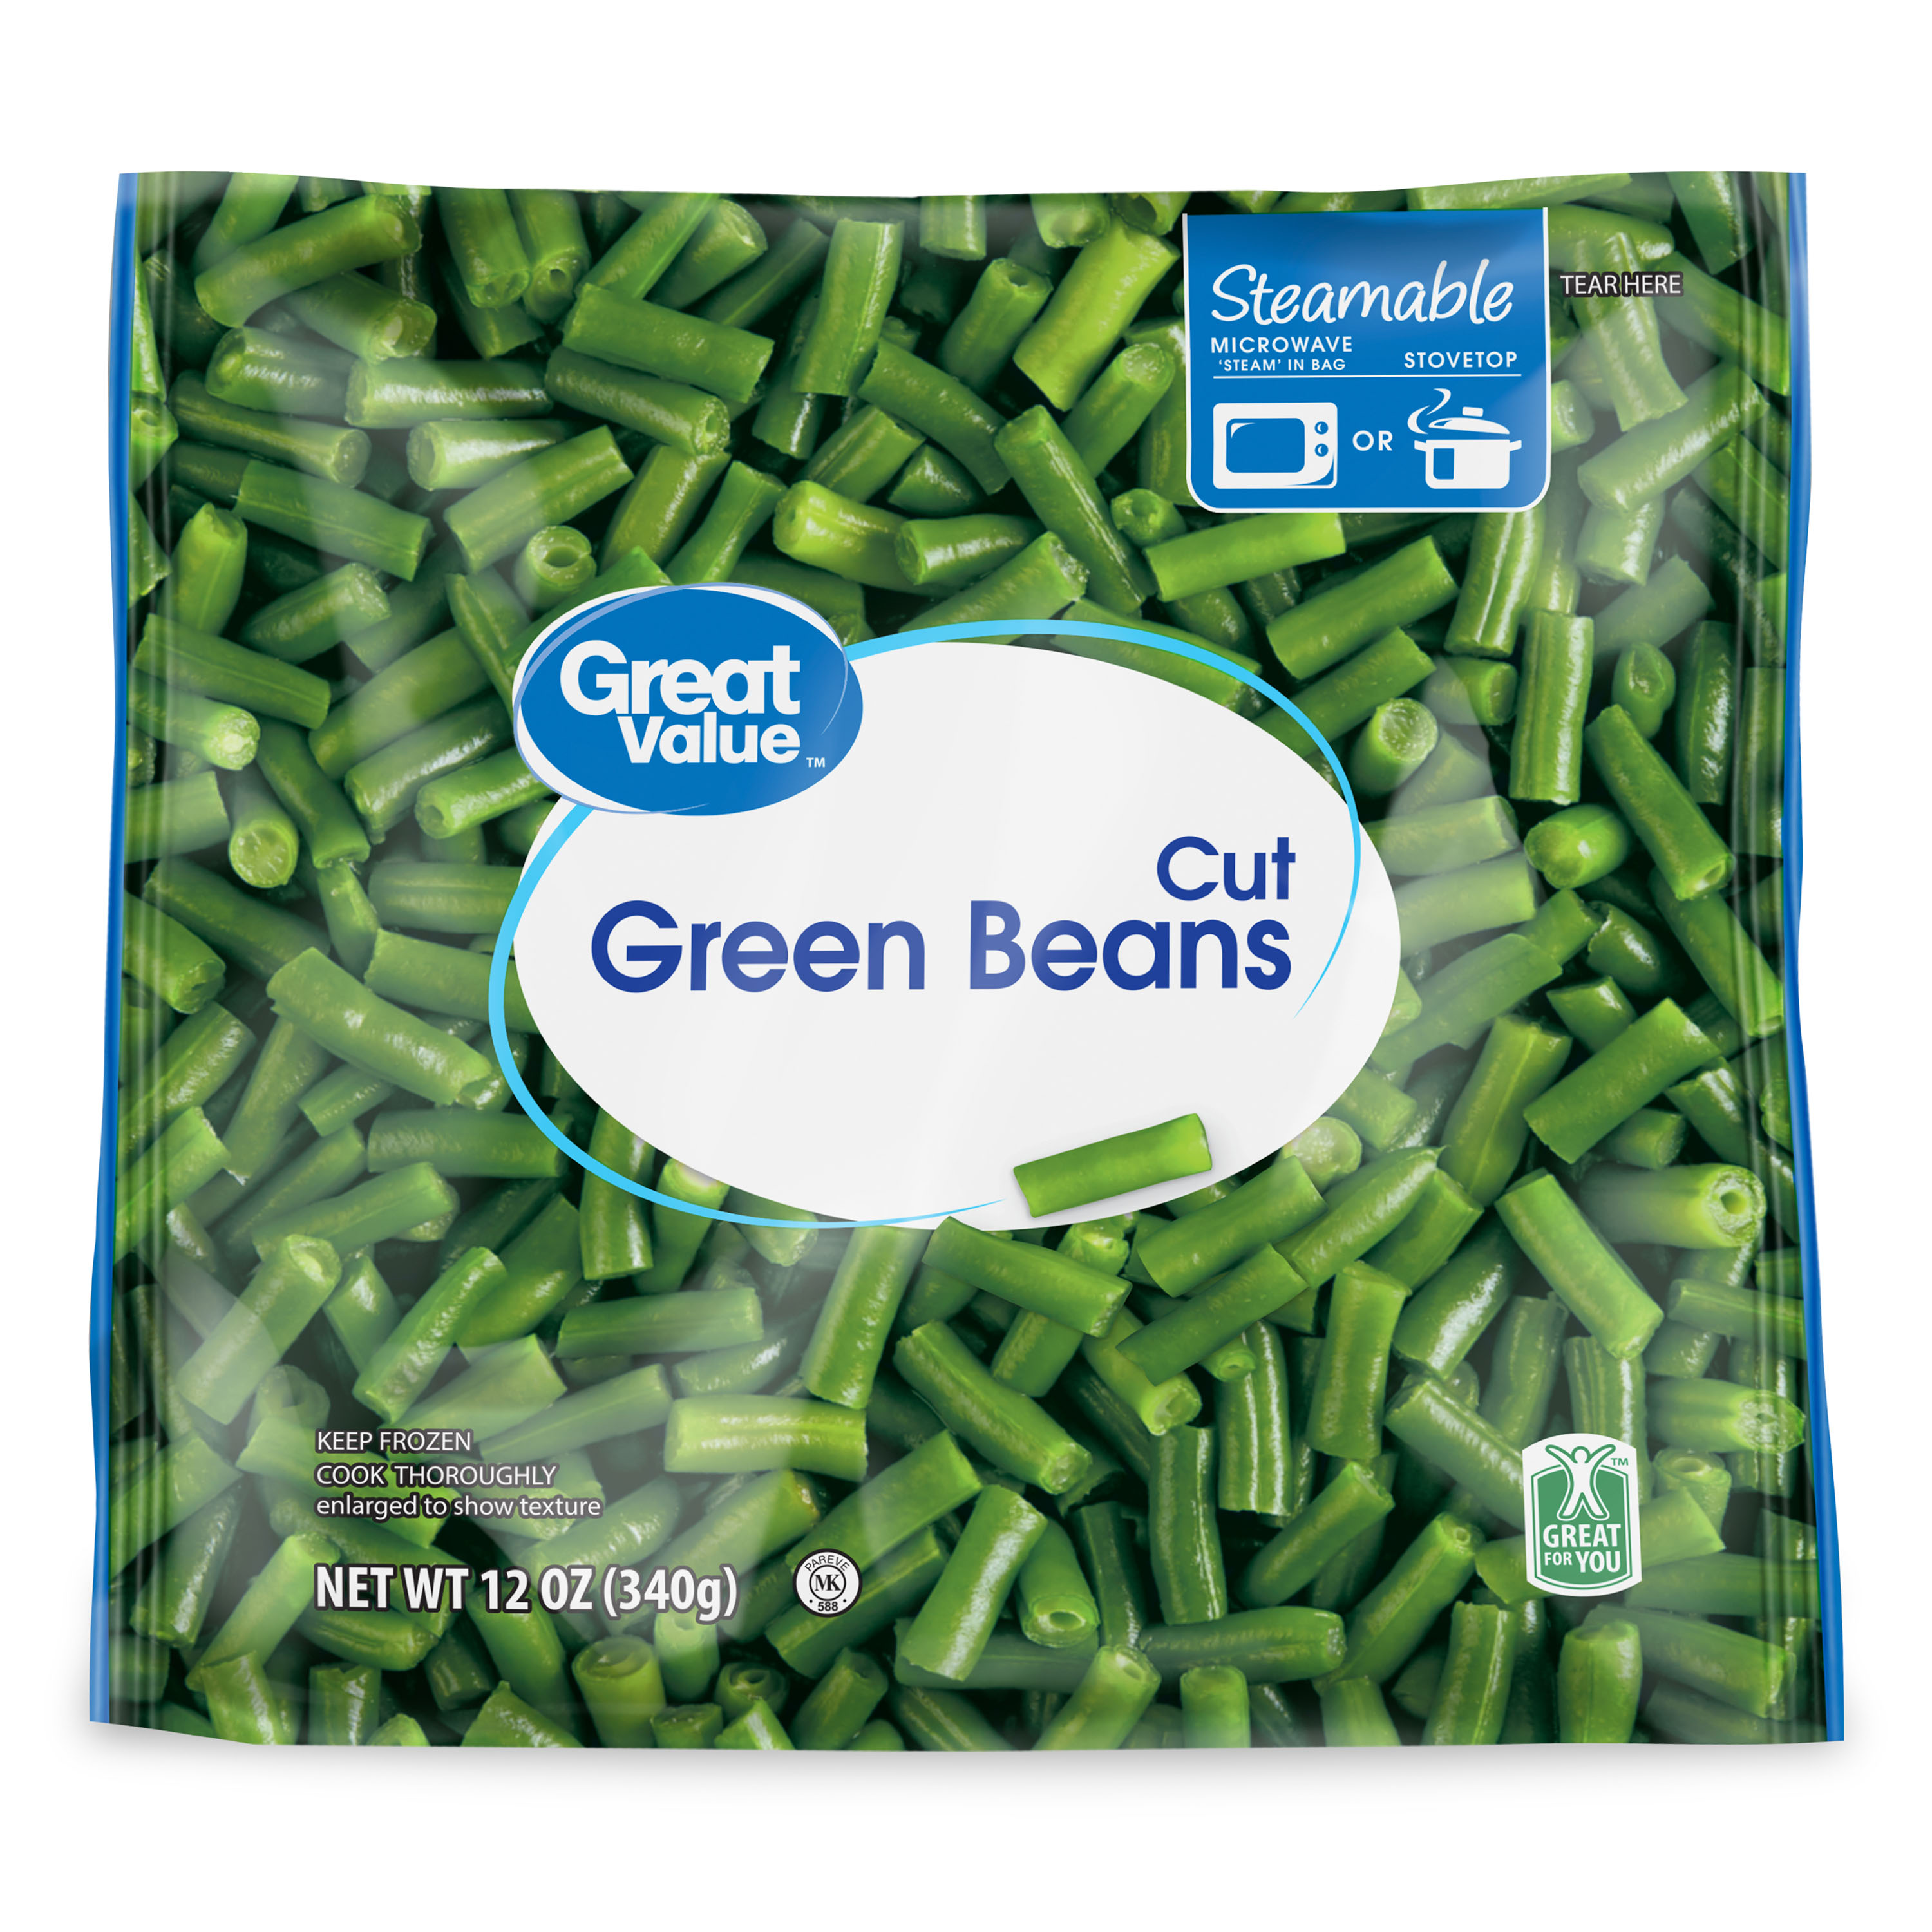 Great Value Cut Green Beans, 12 oz Bag (Frozen) - image 1 of 8